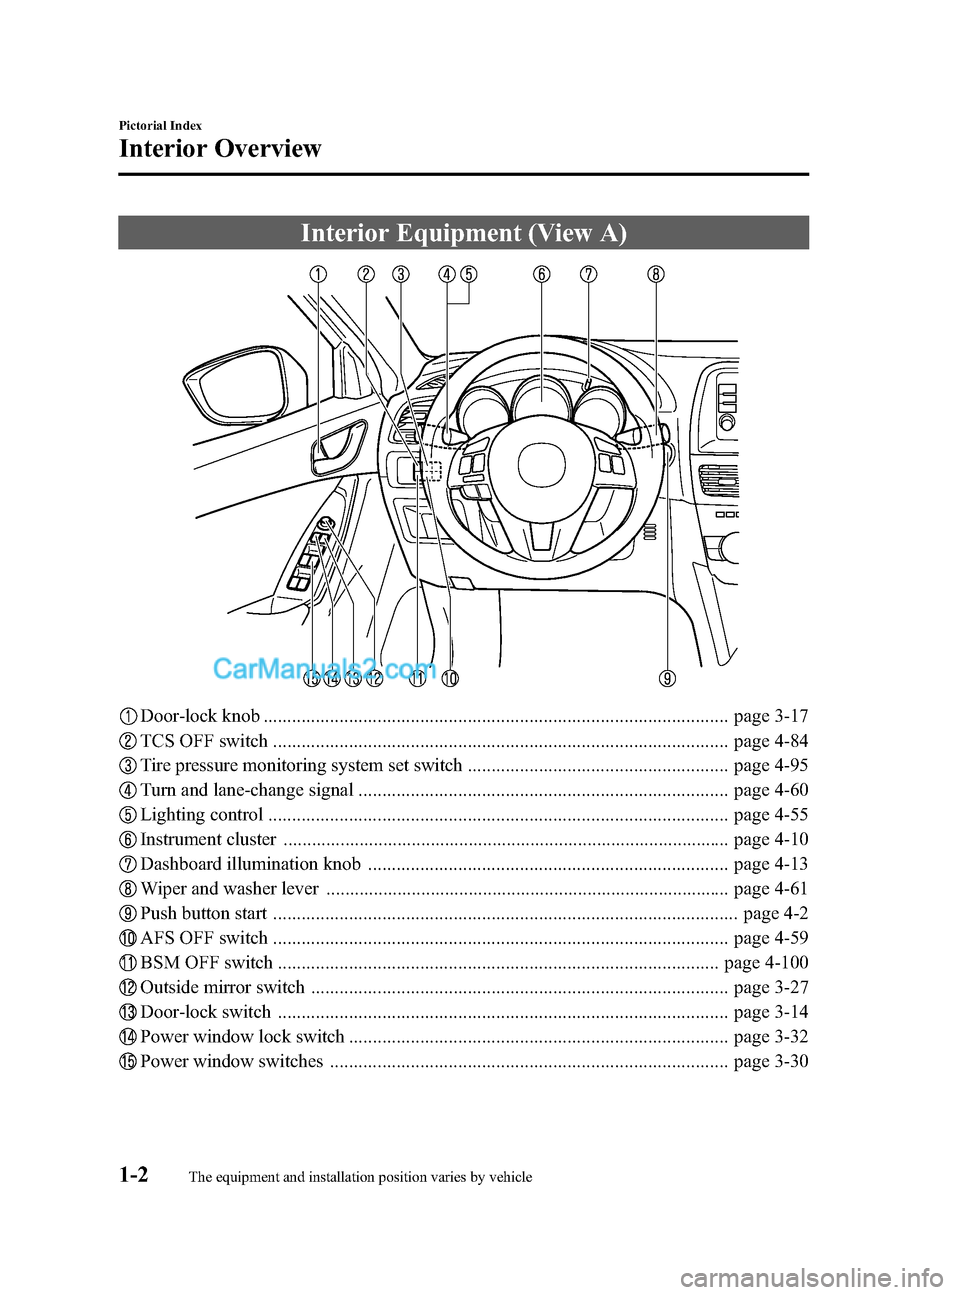 MAZDA MODEL CX-5 2015  Owners Manual (in English) Black plate (8,1)
Interior Equipment (View A)
Door-lock knob .................................................................................................. page 3-17
TCS OFF switch ...............